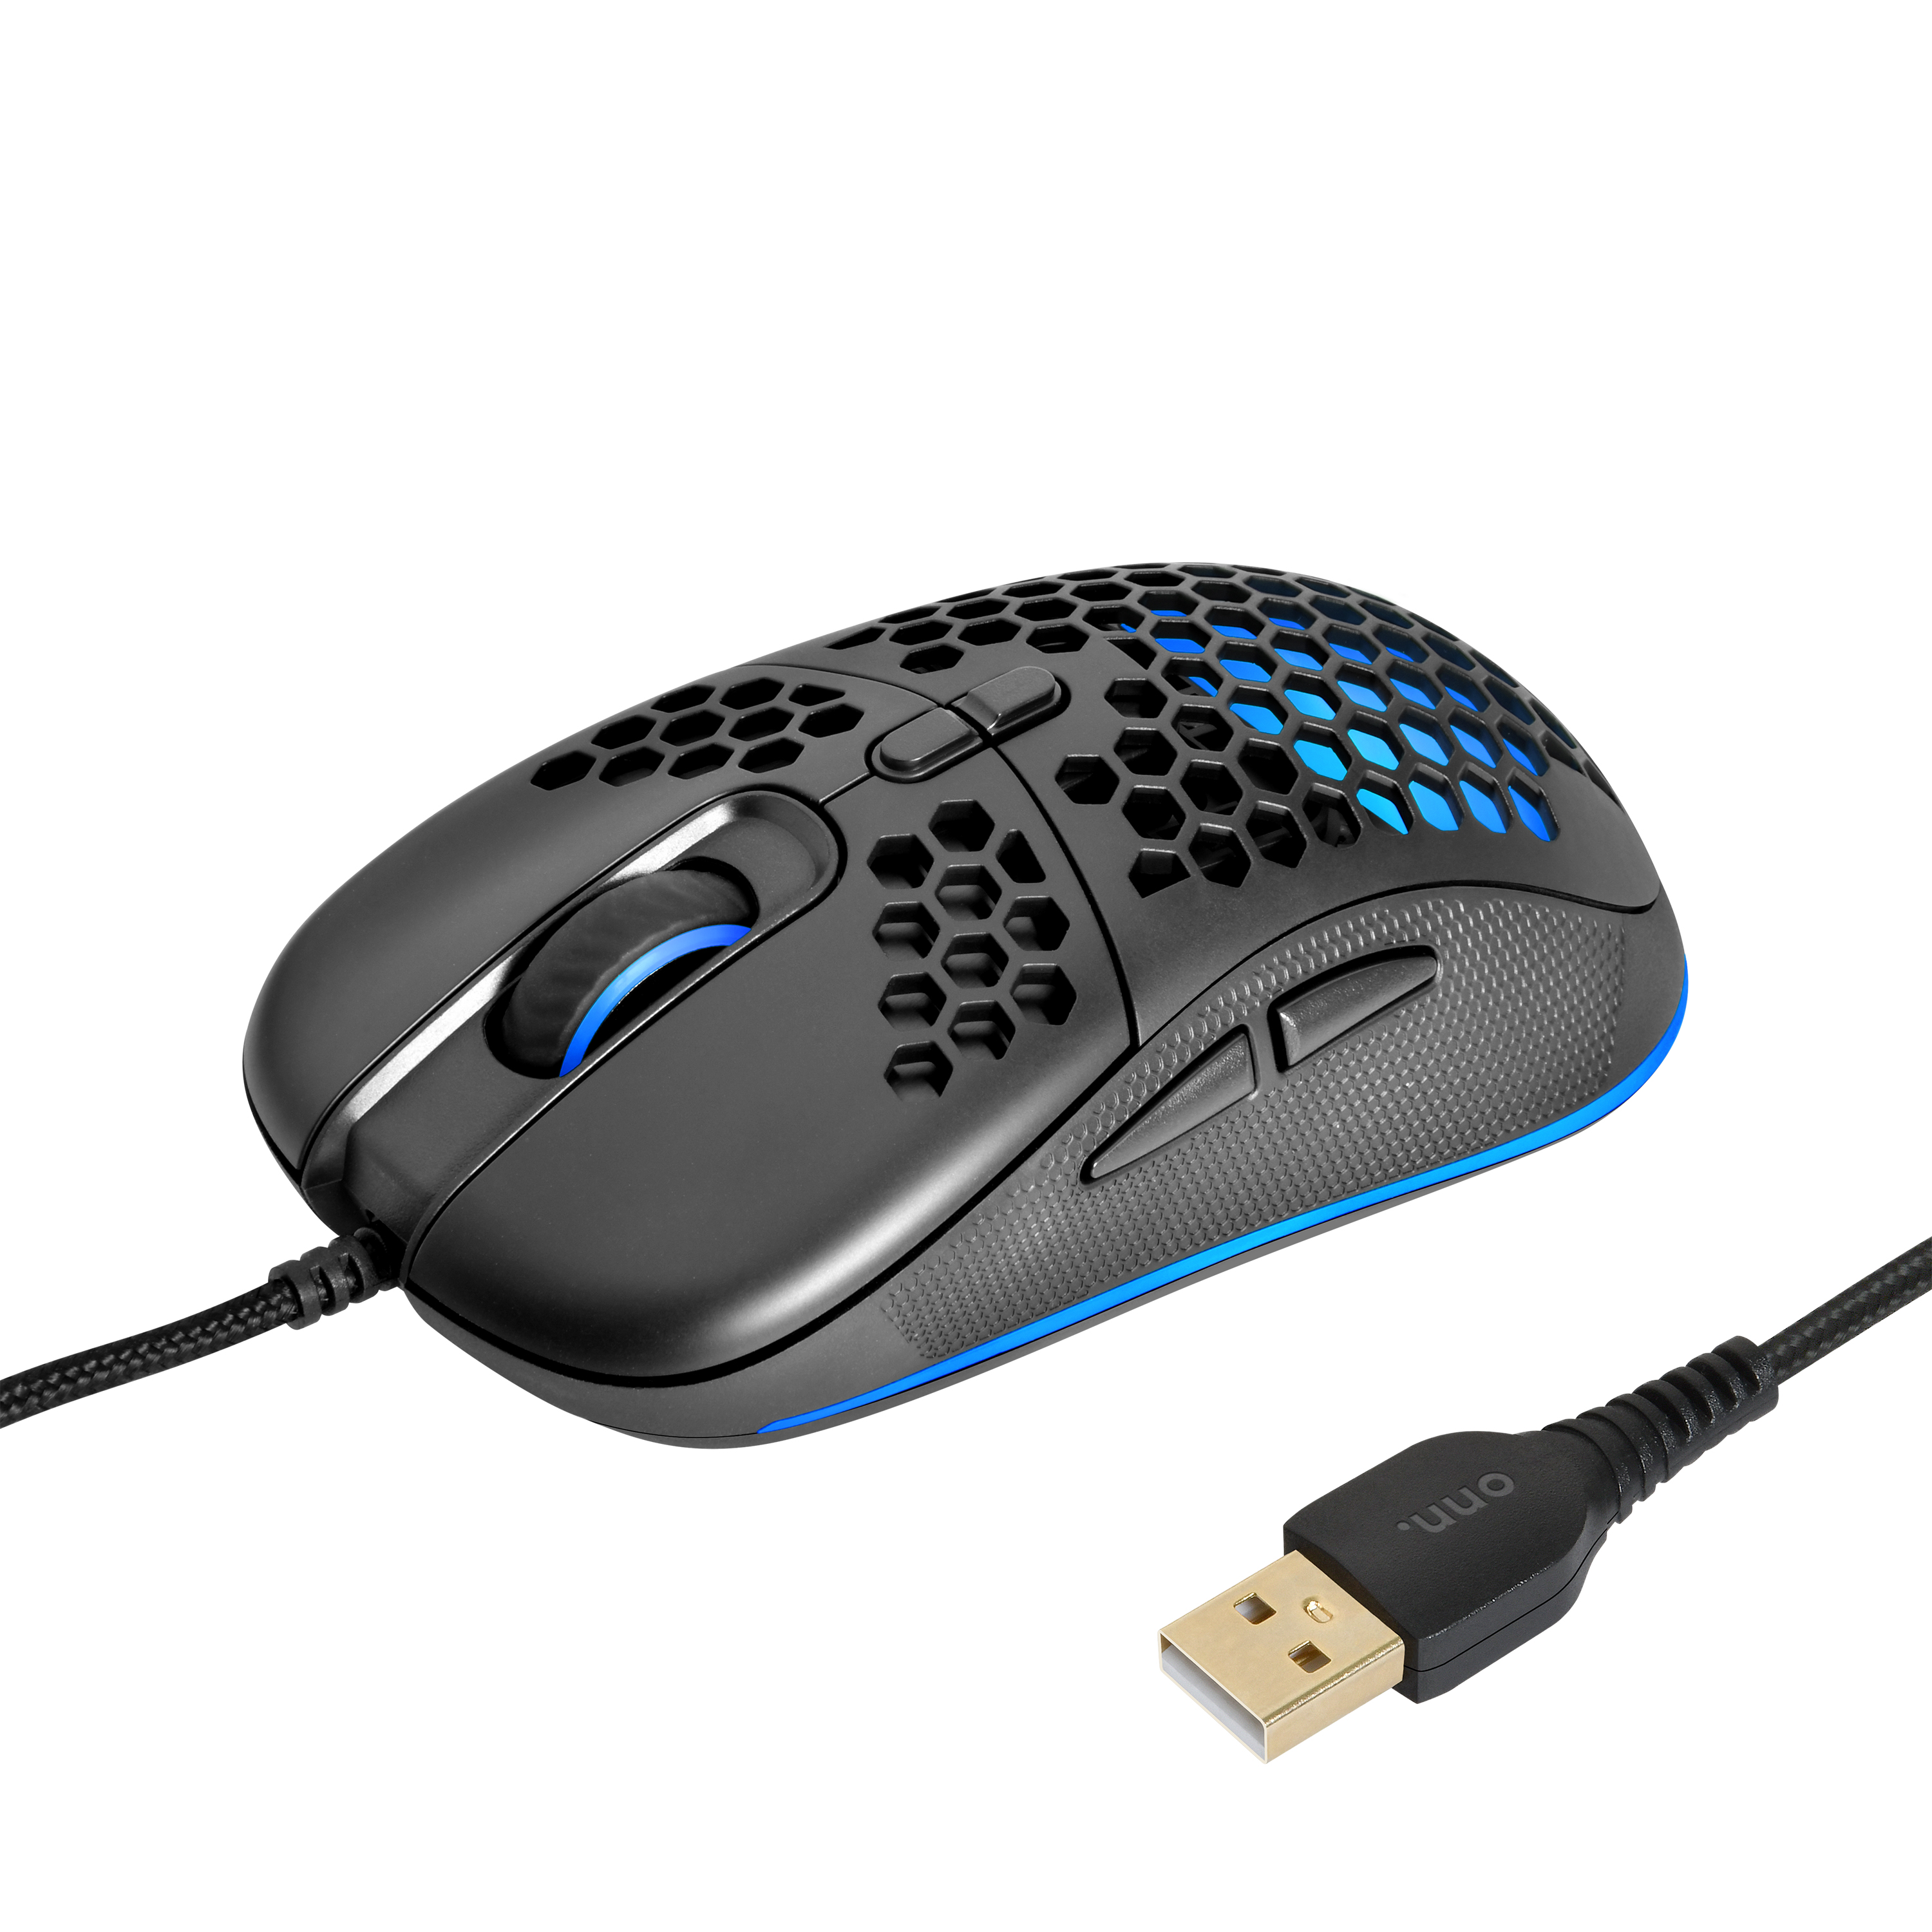 onn. Lightweight Gaming Mouse with LED Lighting and 7 Programmable Buttons, Adjustable 200-7200 DPI - image 3 of 13